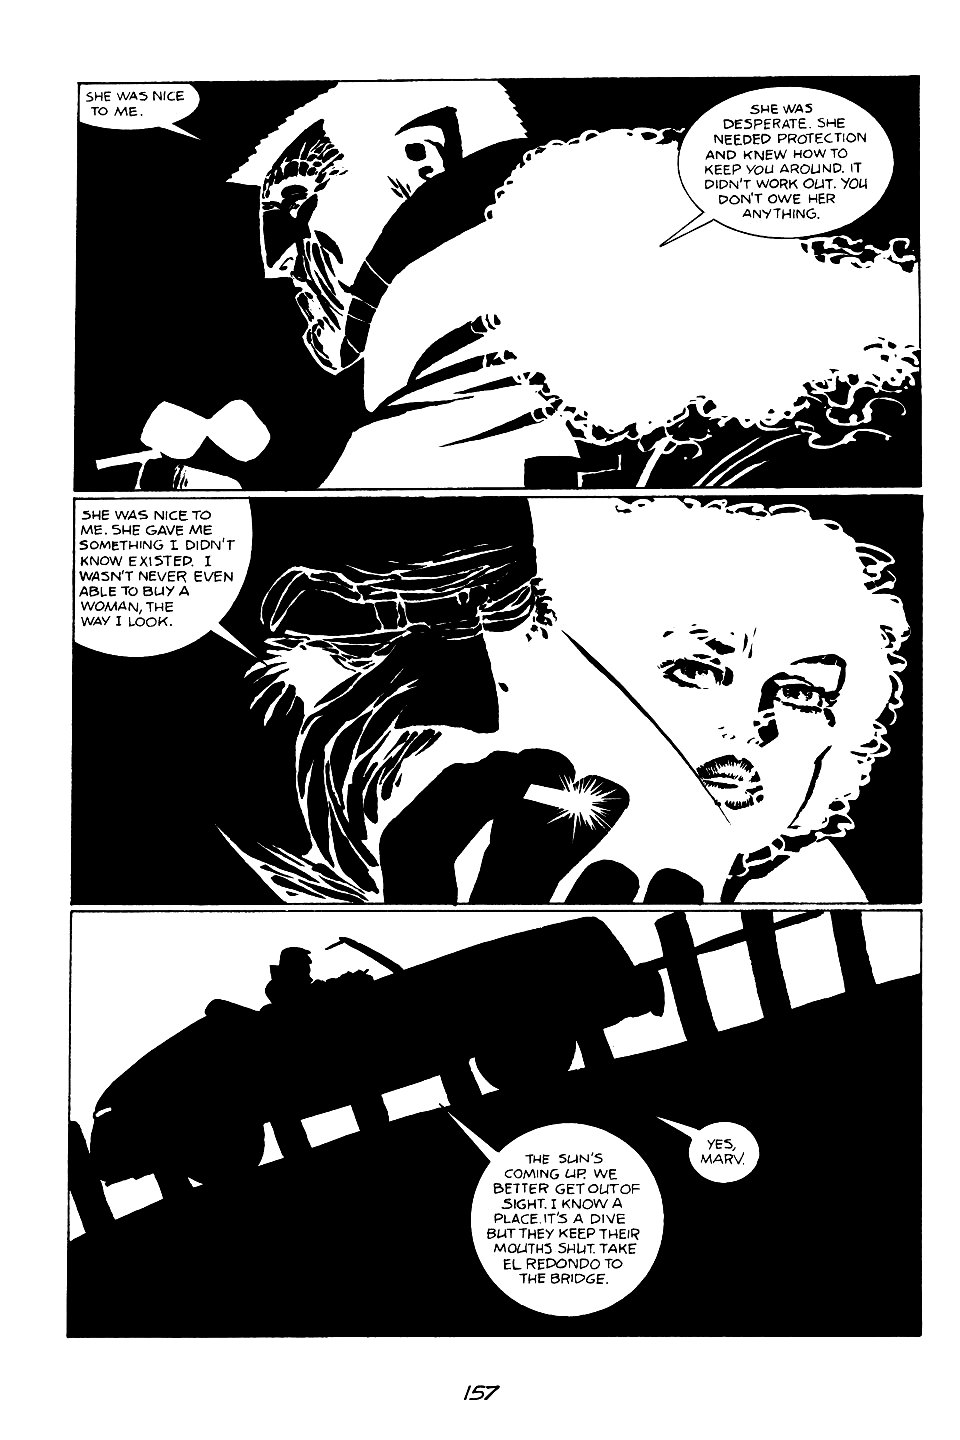 page 157 of sin city 1 the hard goodbye